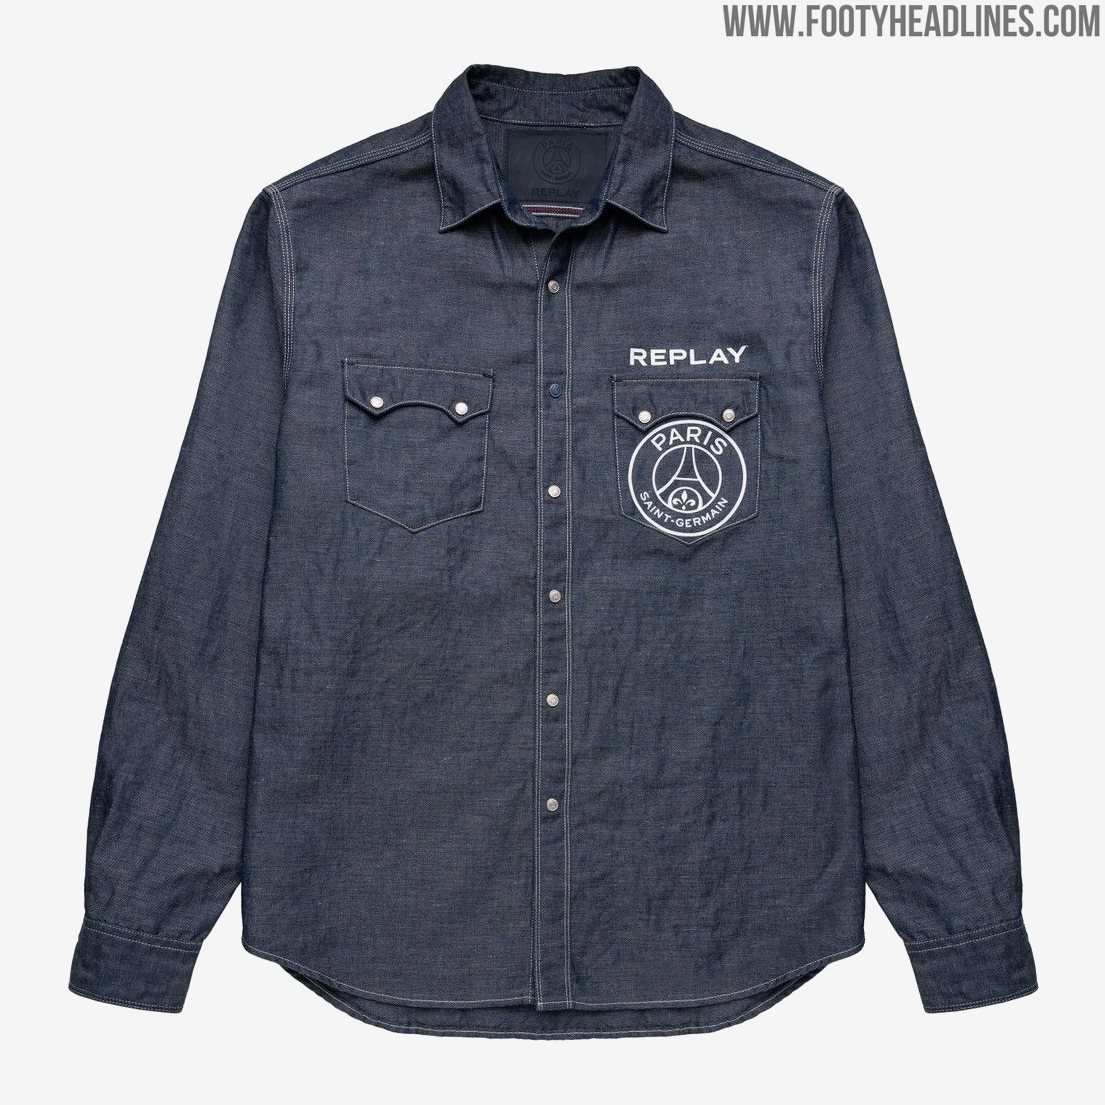 First-Ever Replay x PSG Denim Collection Released - All Items - Footy ...